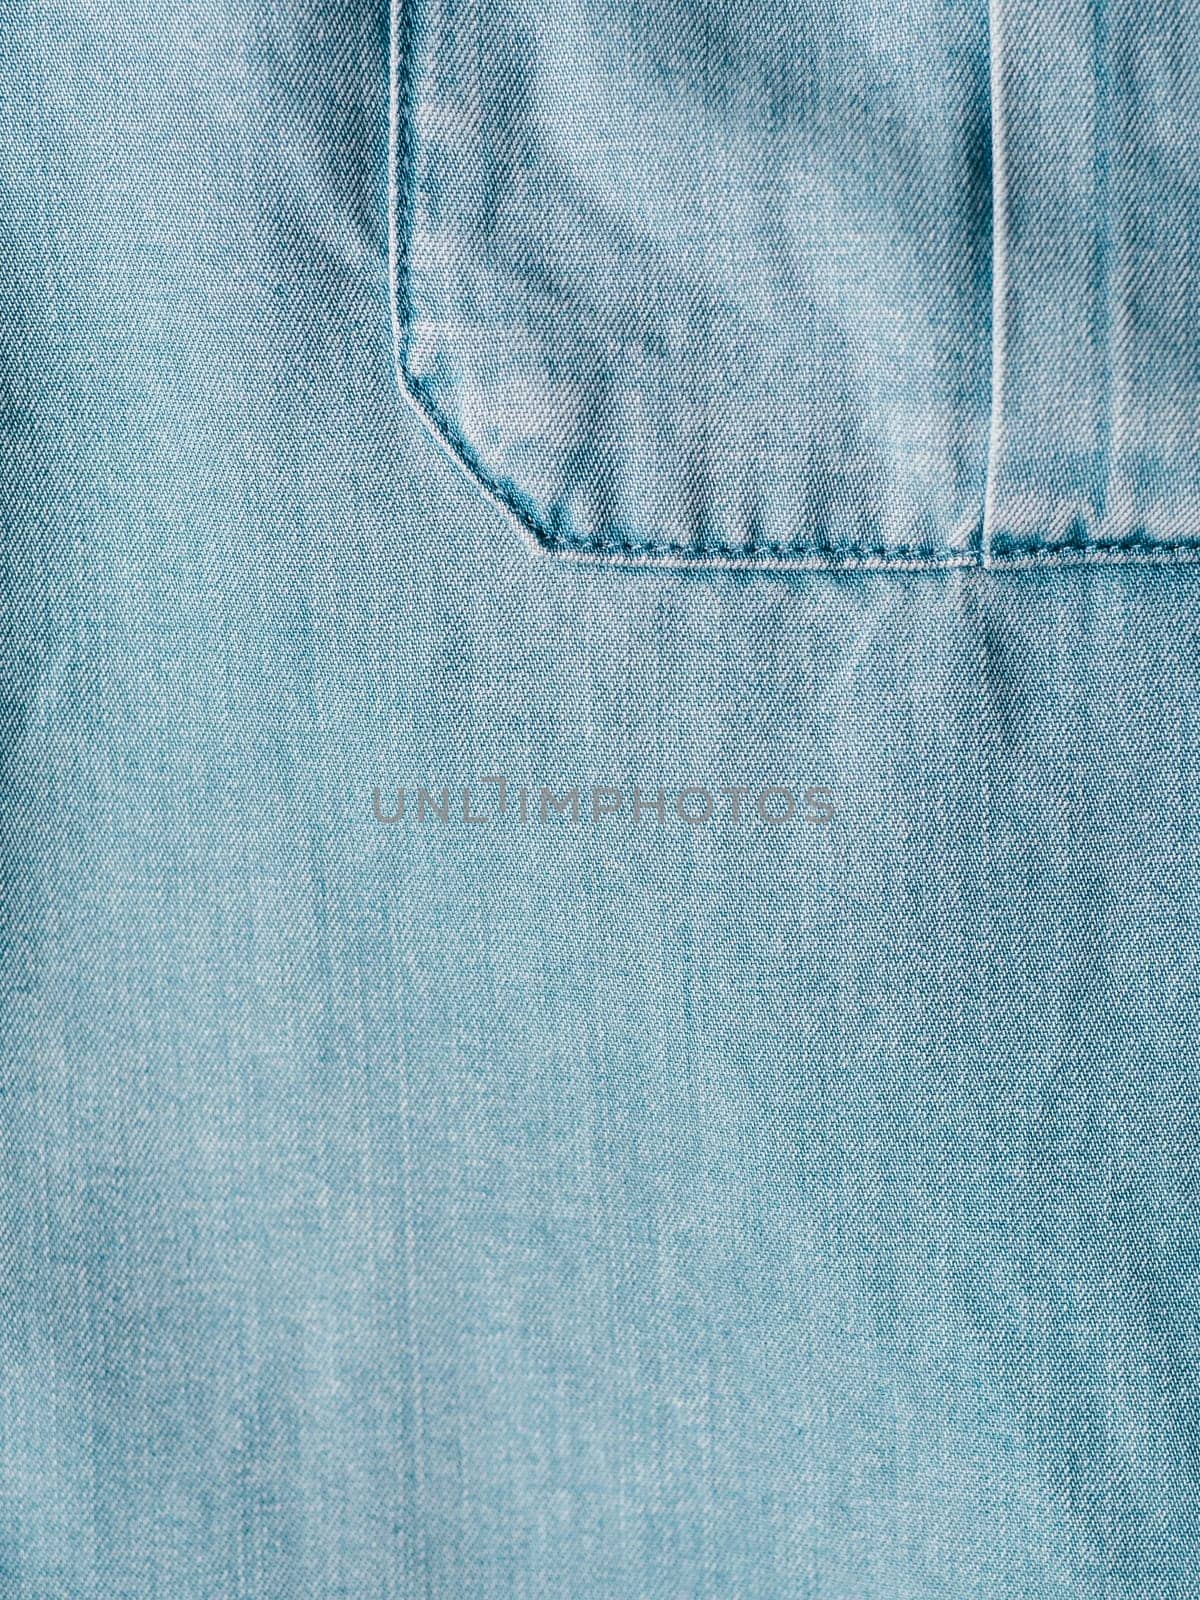 Modern soft jeans blouse with breast pocket texture close up. Lyocell or tencel pattern - modern natural cellulose fabric blue denim color. Can use for design or text. Copy space